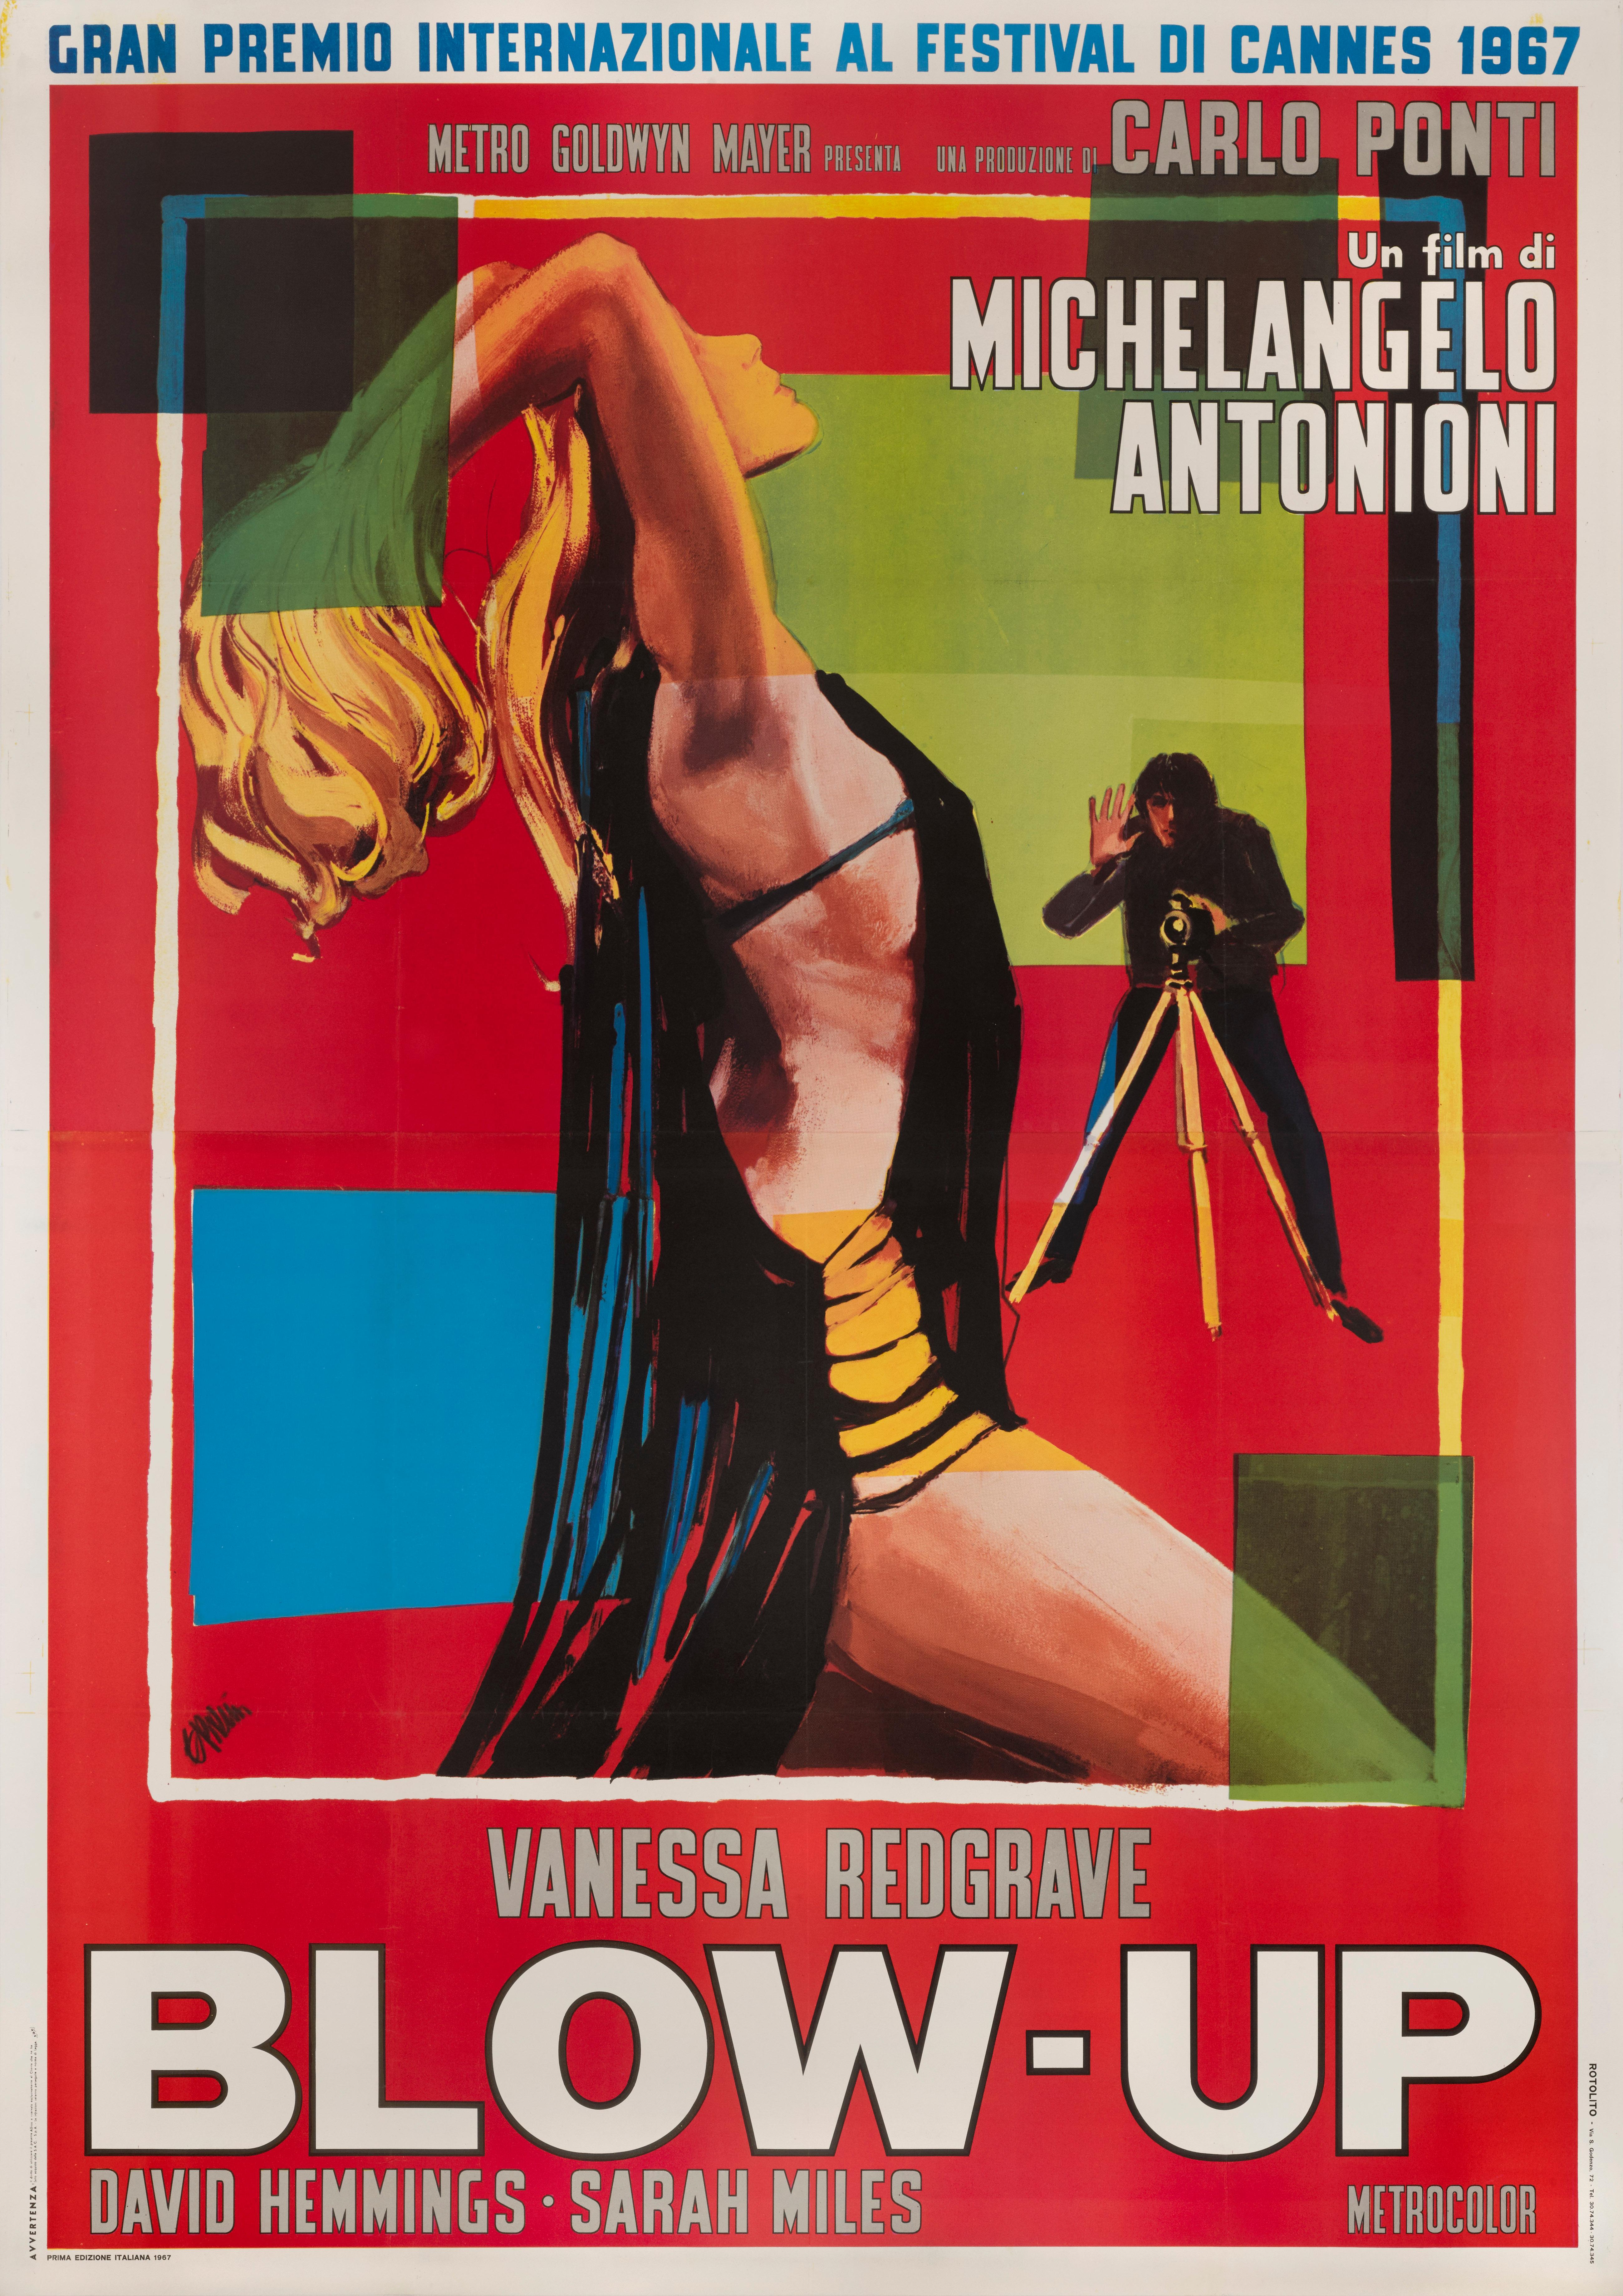 Original Italian film poster. This piece was printed in two sheets, and designed to be pasted onto billboards. Therefore only unused examples survived. This poster was designed by Ercole Brini (1913-1989).
This cult classic was directed